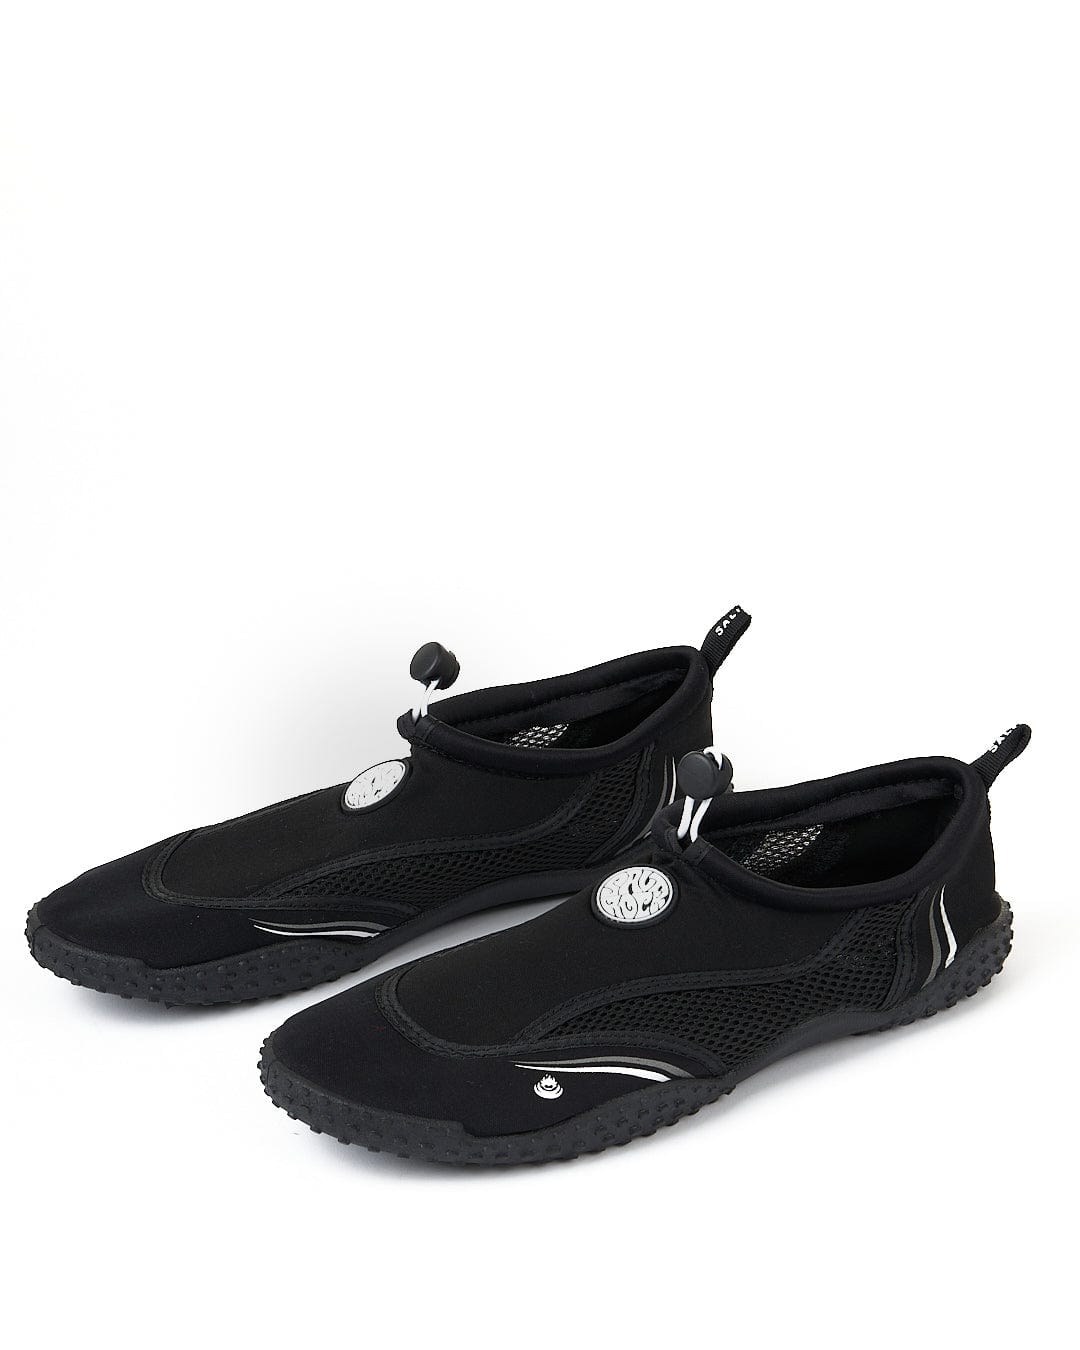 A pair of black Saltrock Core Aqua Shoes with adjustable drawstring closures and a white logo on the side, displayed against a white background.